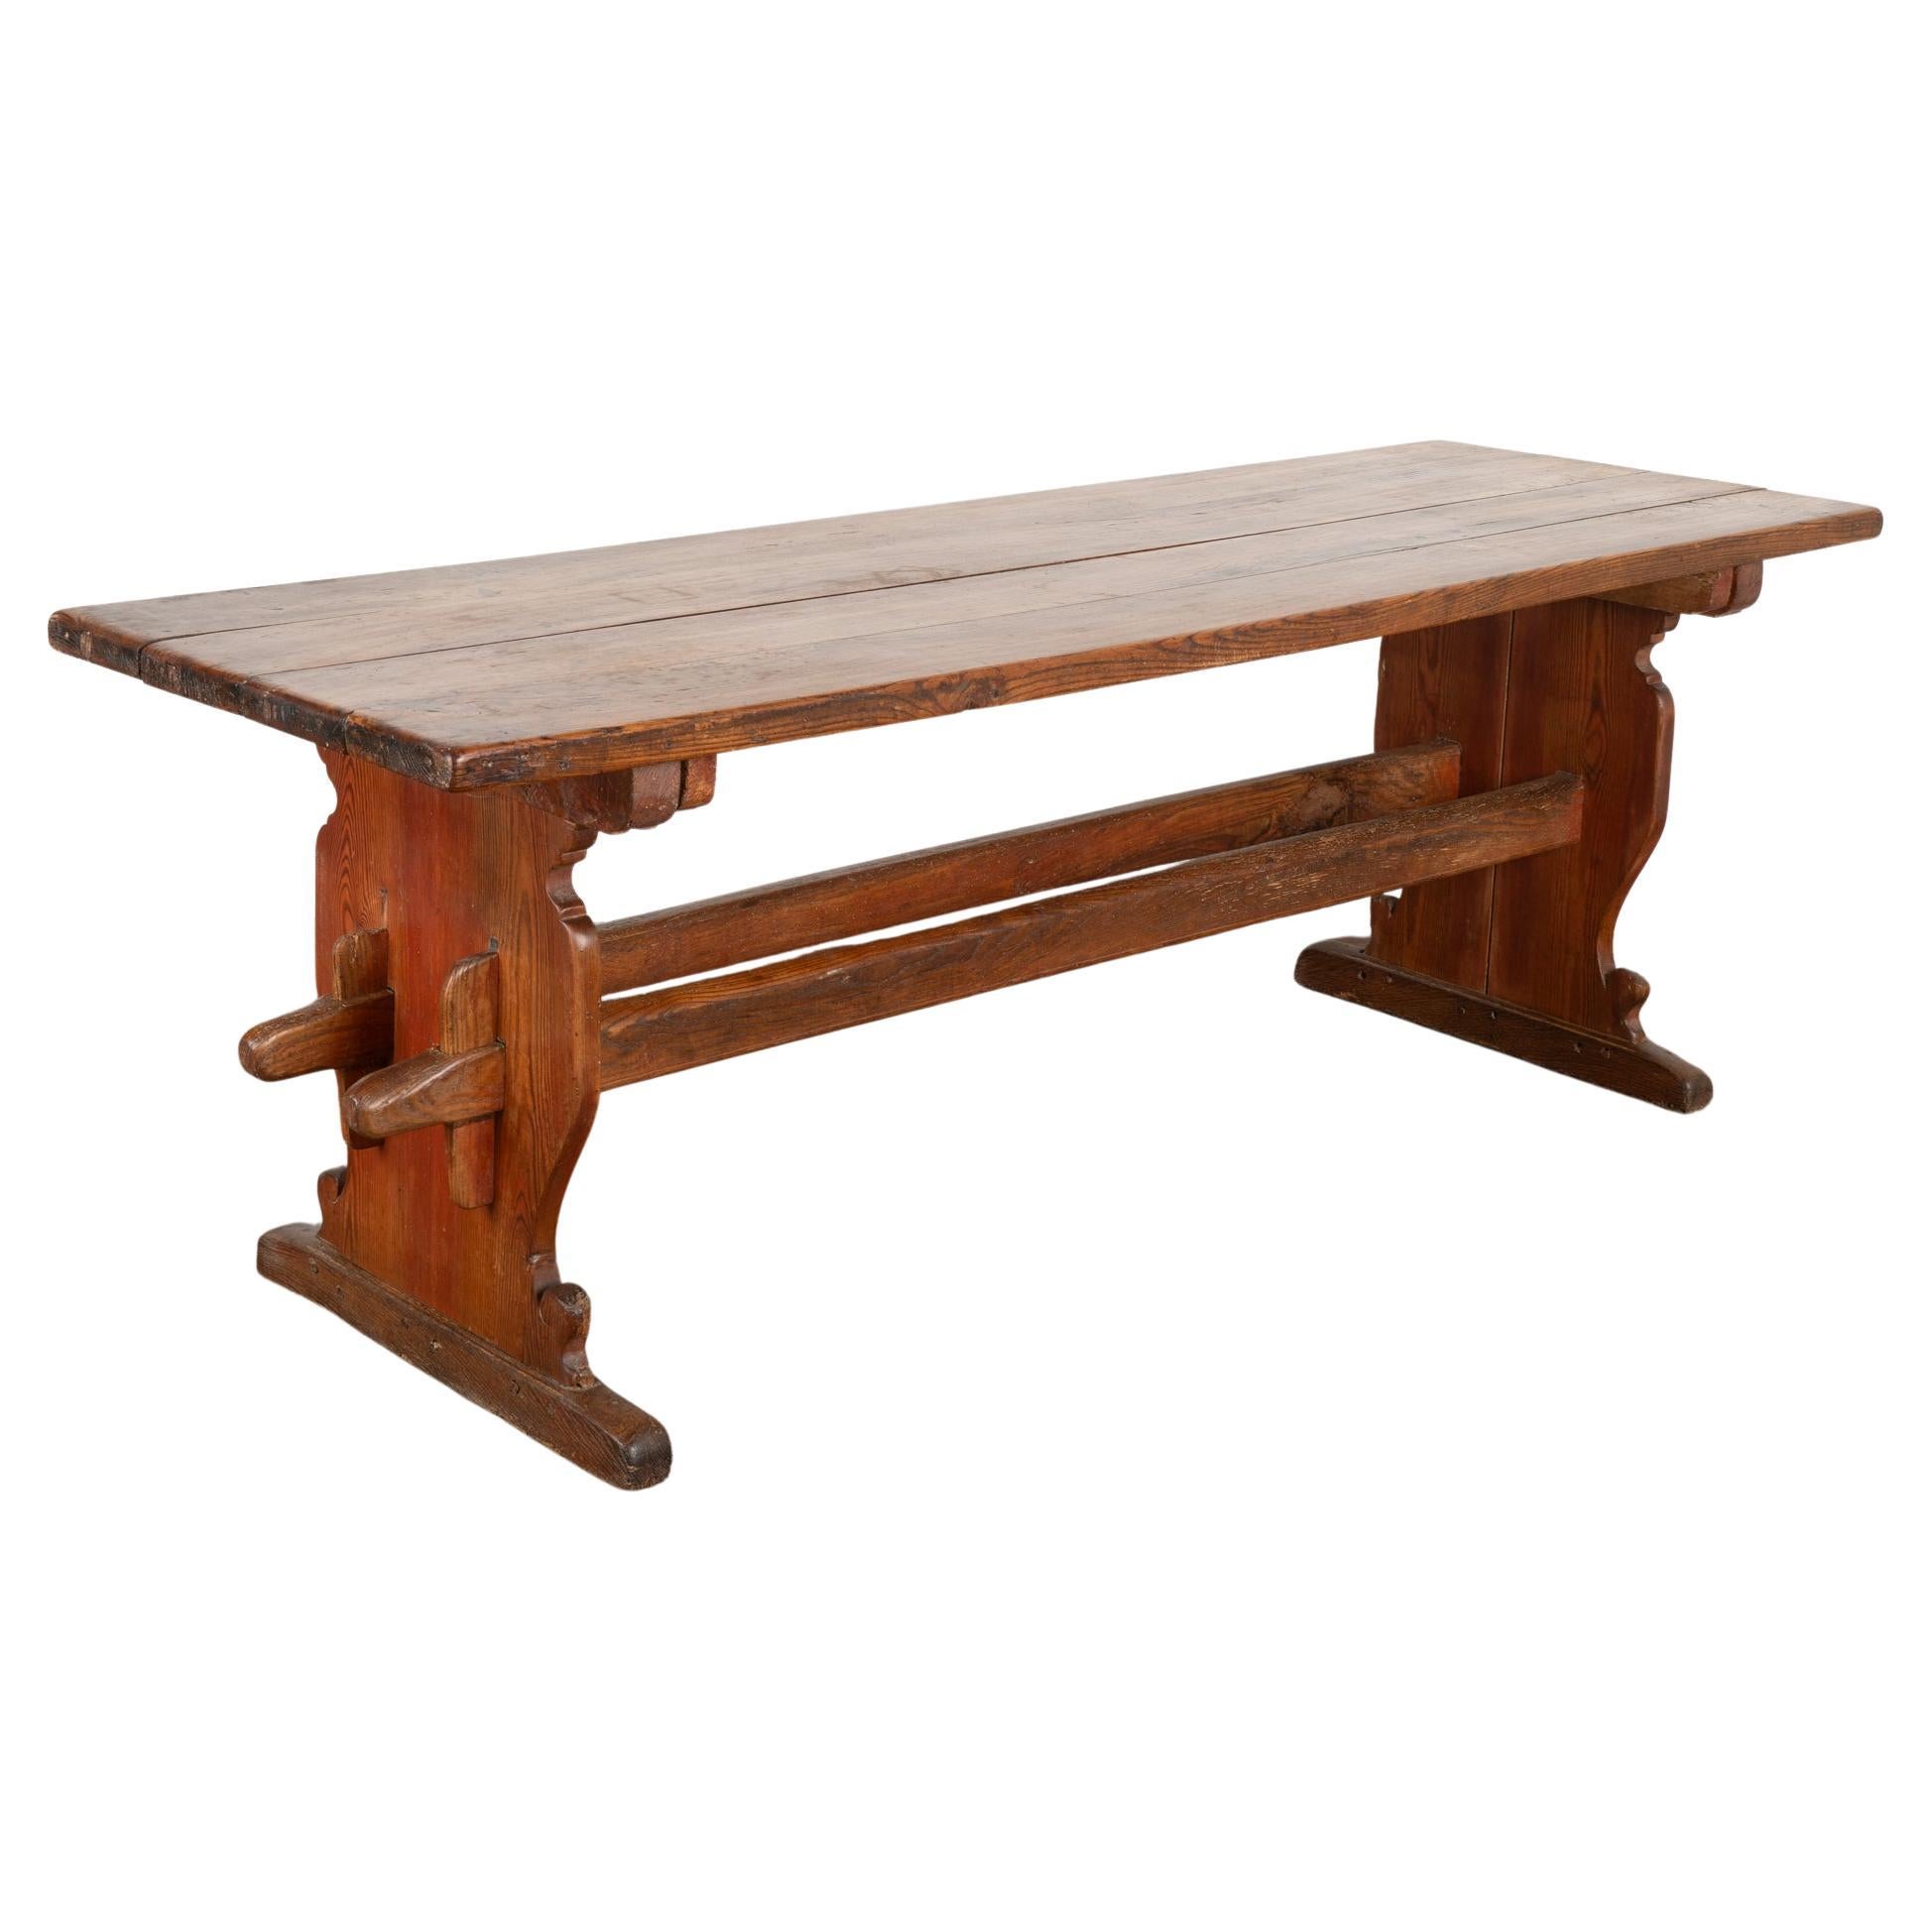 Farm Dining Kitchen Table With Trestle Base, Denmark circa 1820-40 For Sale